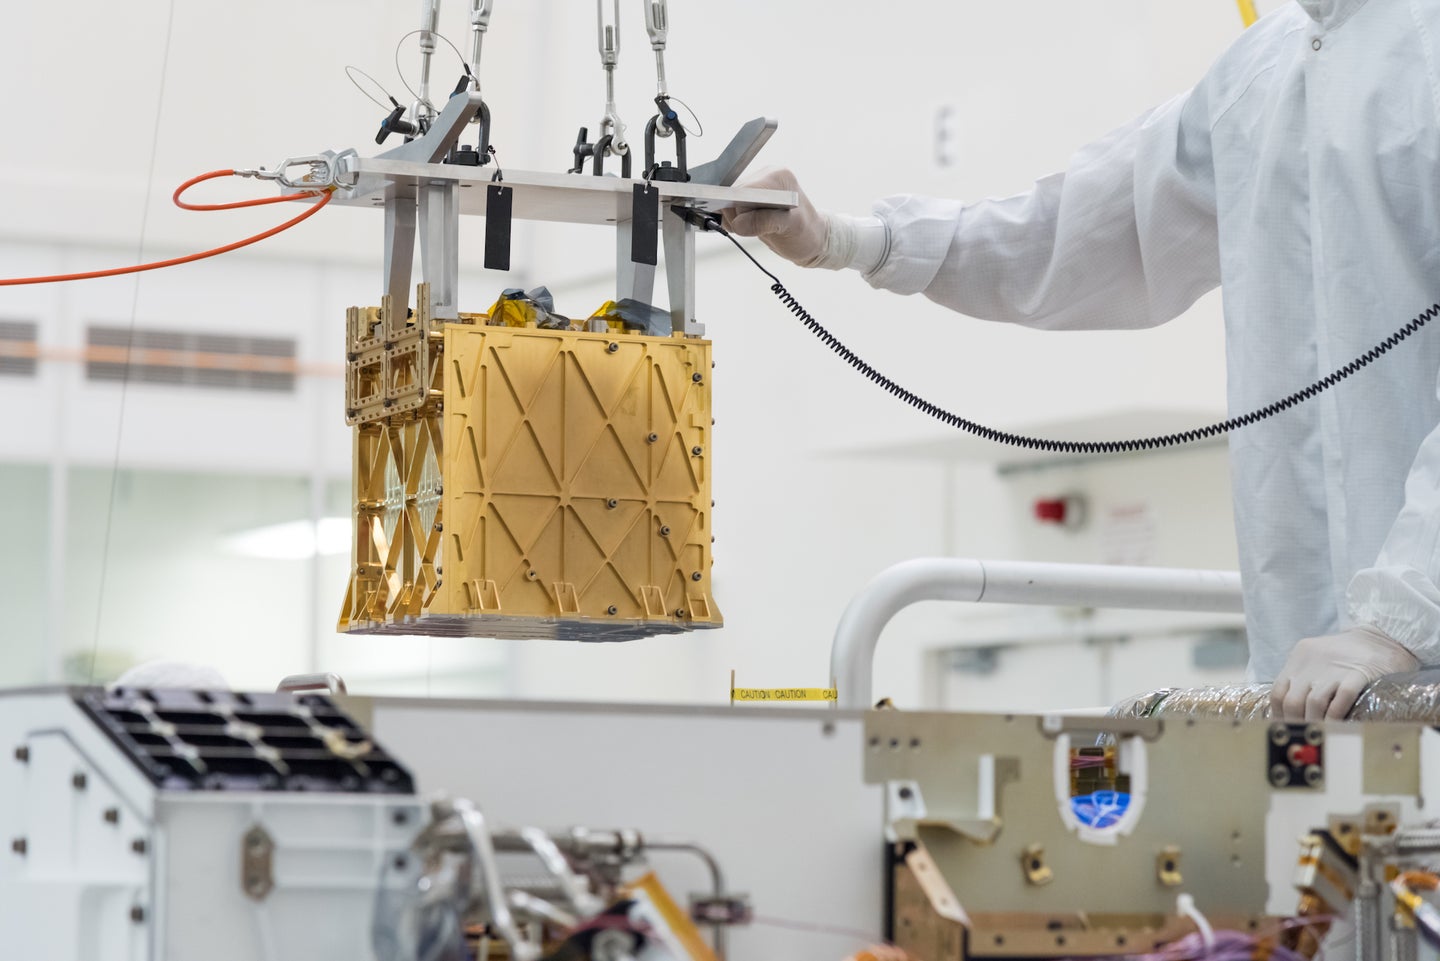 NASA's MOXIE instrument can make oxygen on Mars, an environment rich in carbon dioxide.